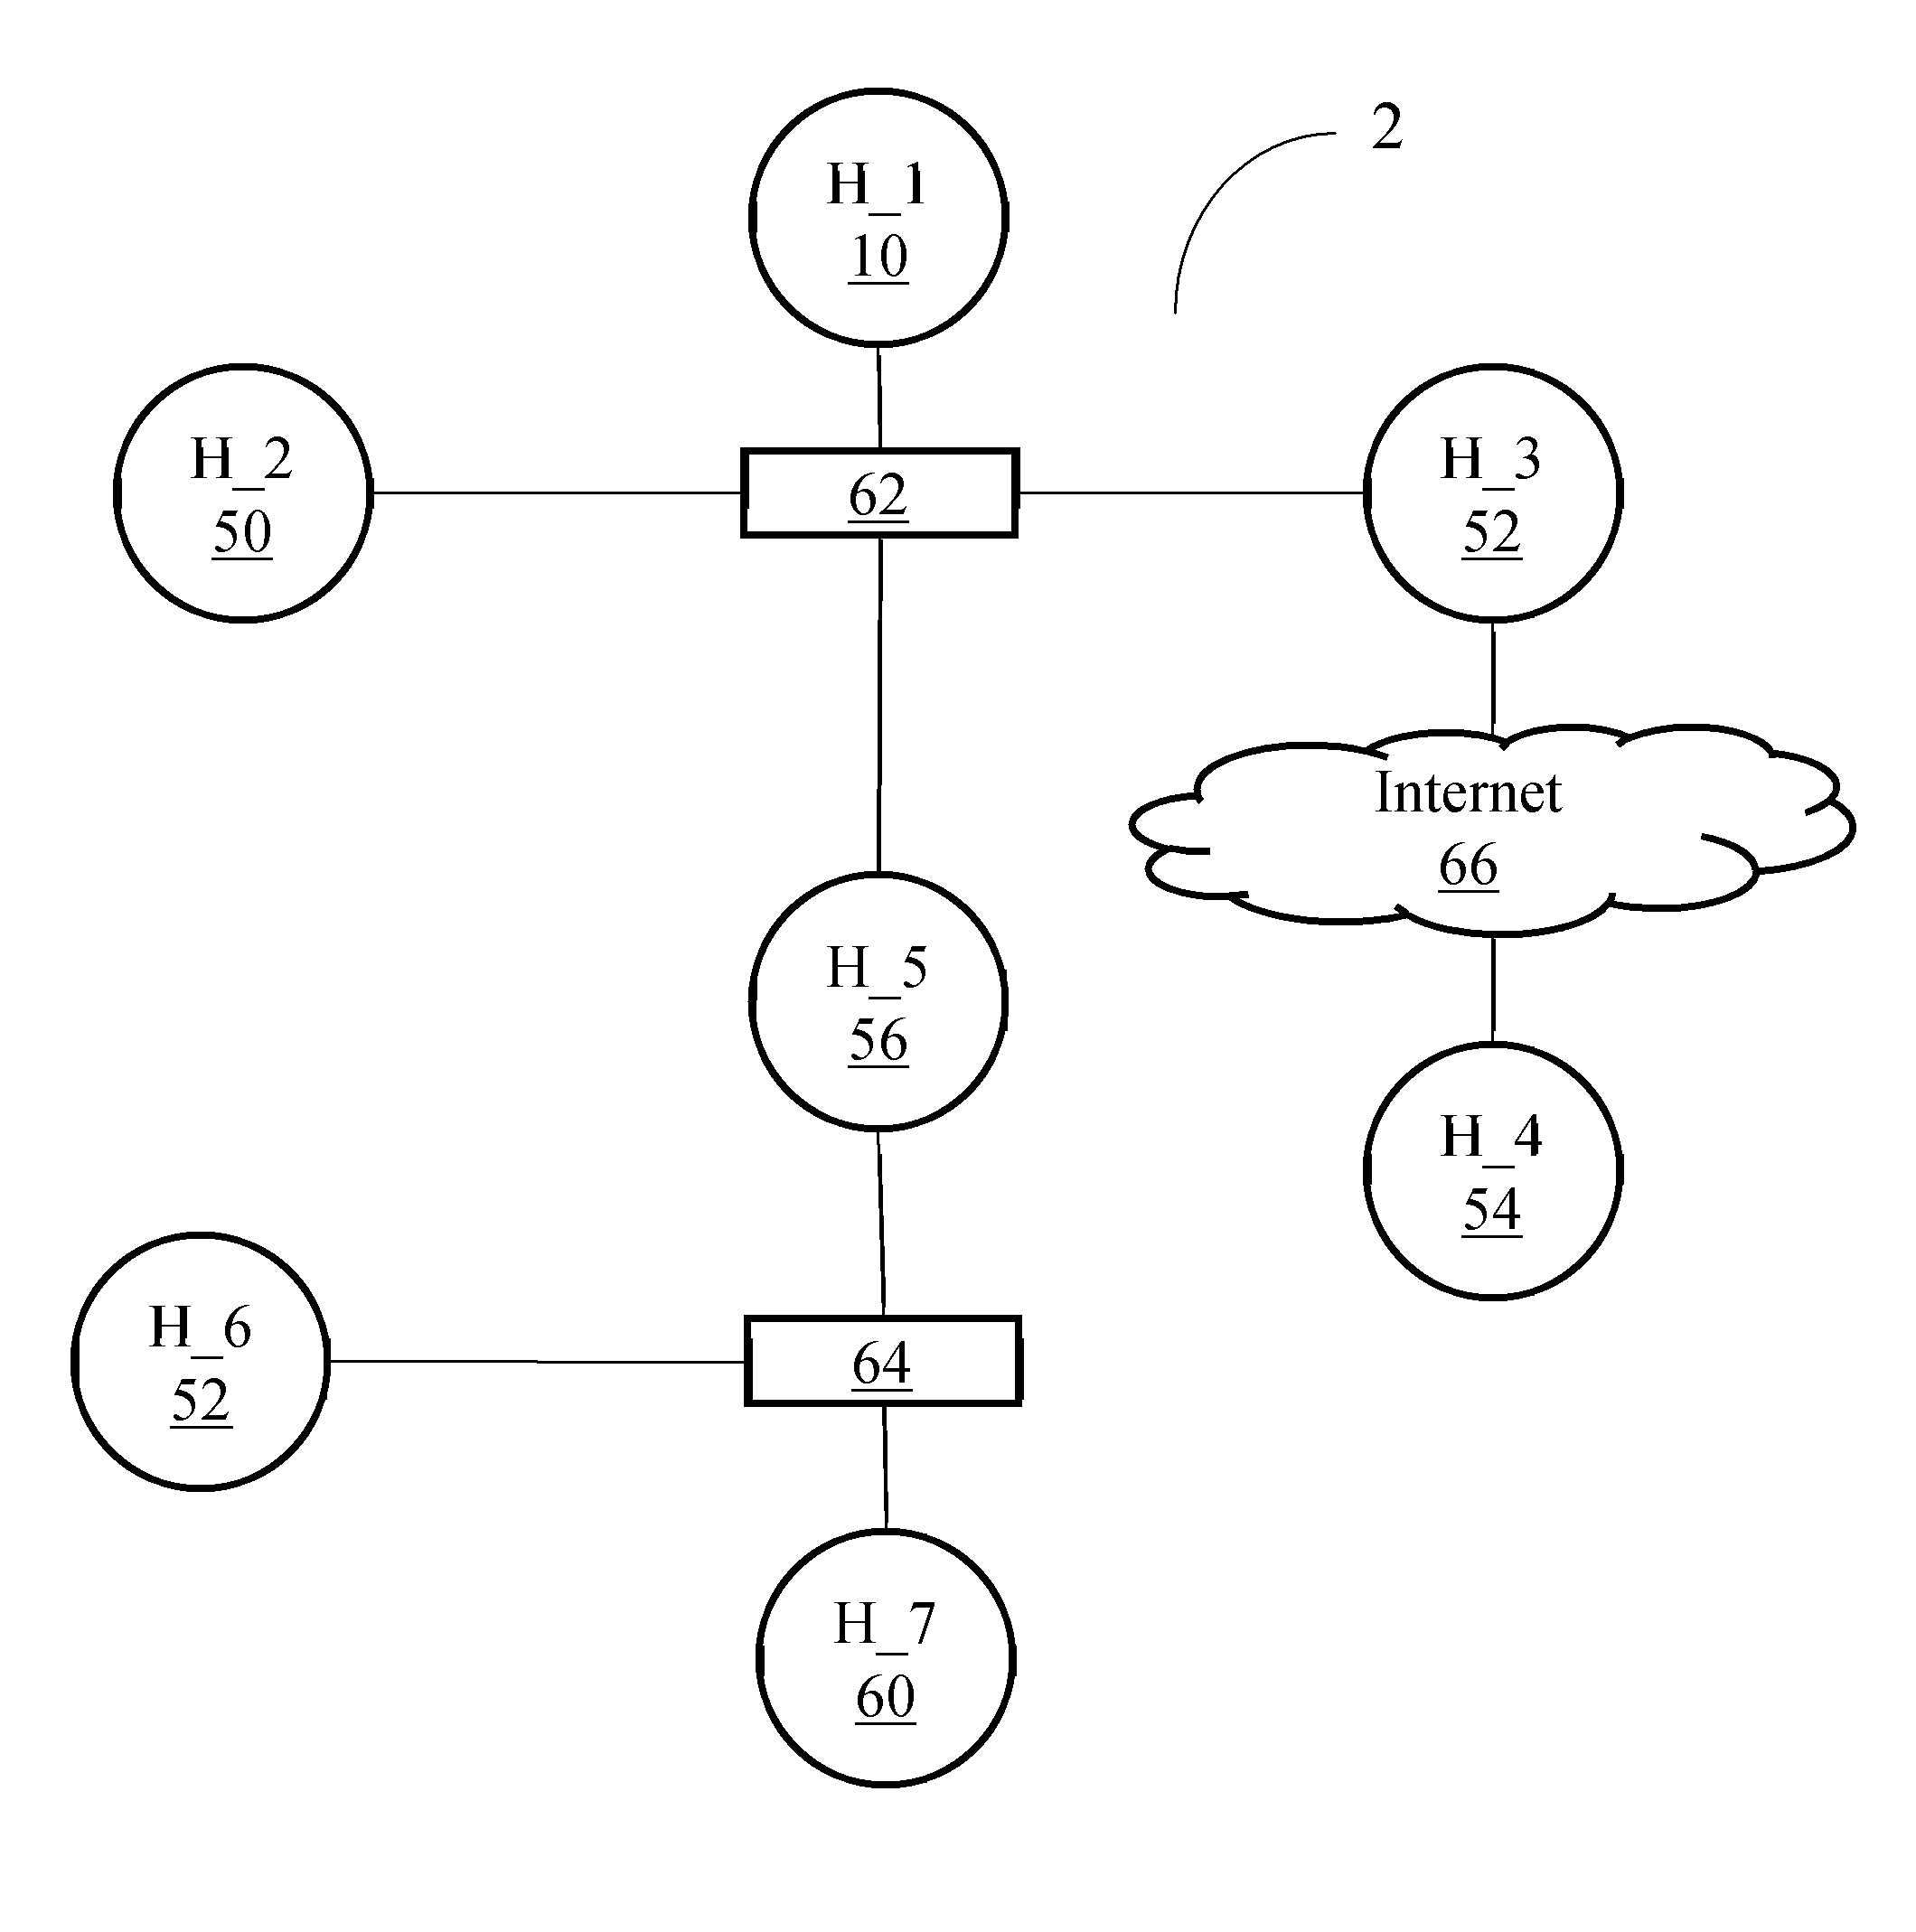 System and method for probabilistic attack planning